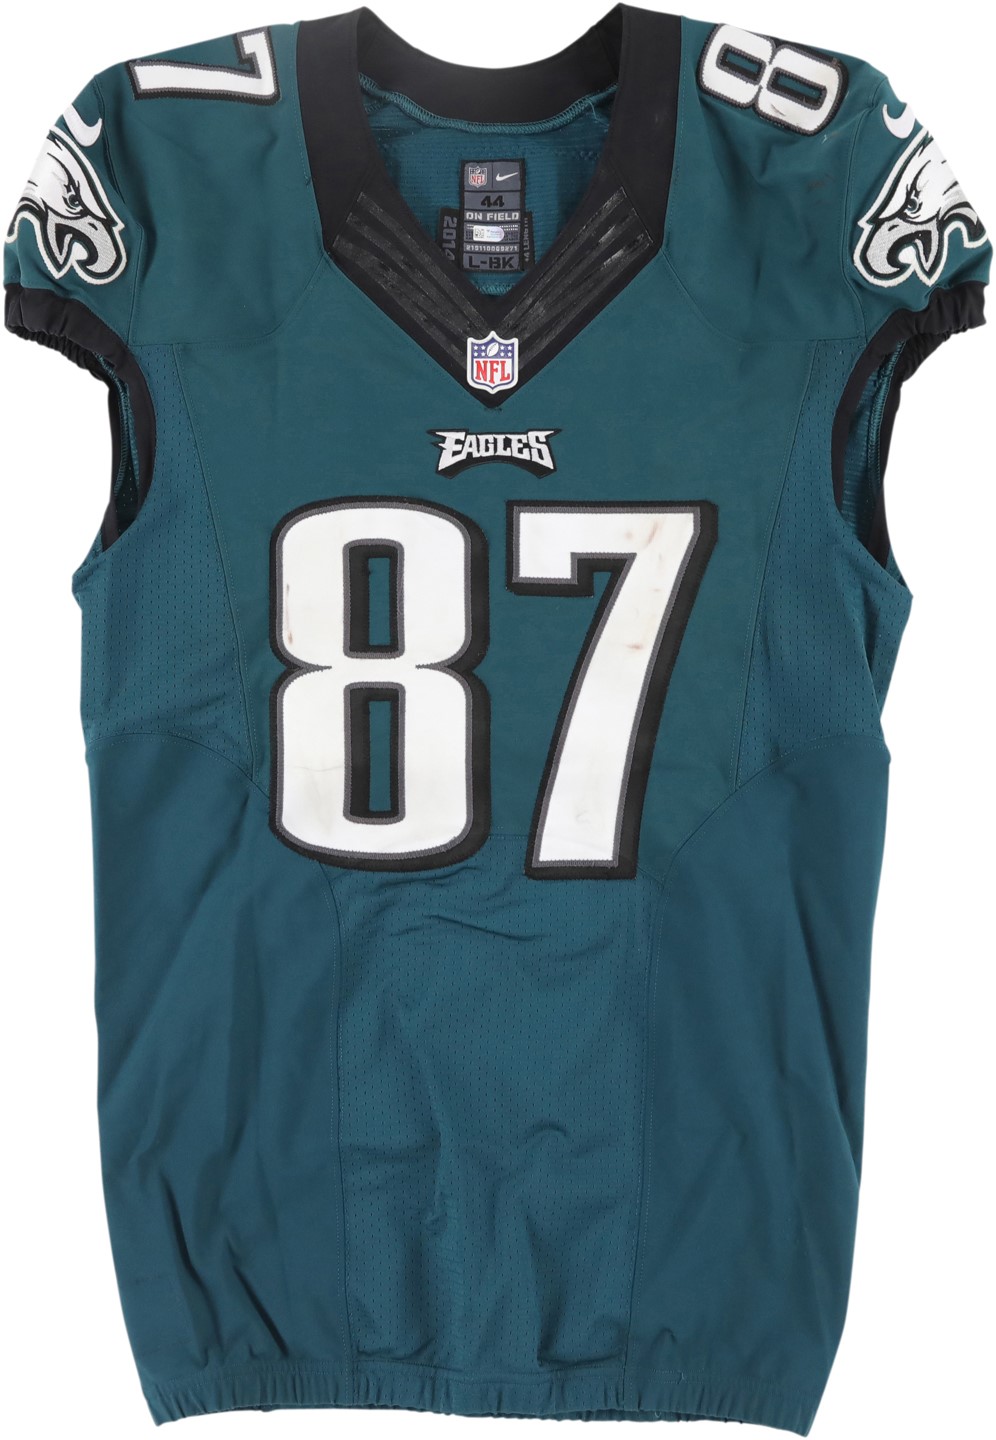 The Philadelphia Eagles Collection - 2016 Brent Celek Philadelphia Eagles Signed Game Worn Jersey with Pants (Photo-Matched & Fanatics COA)